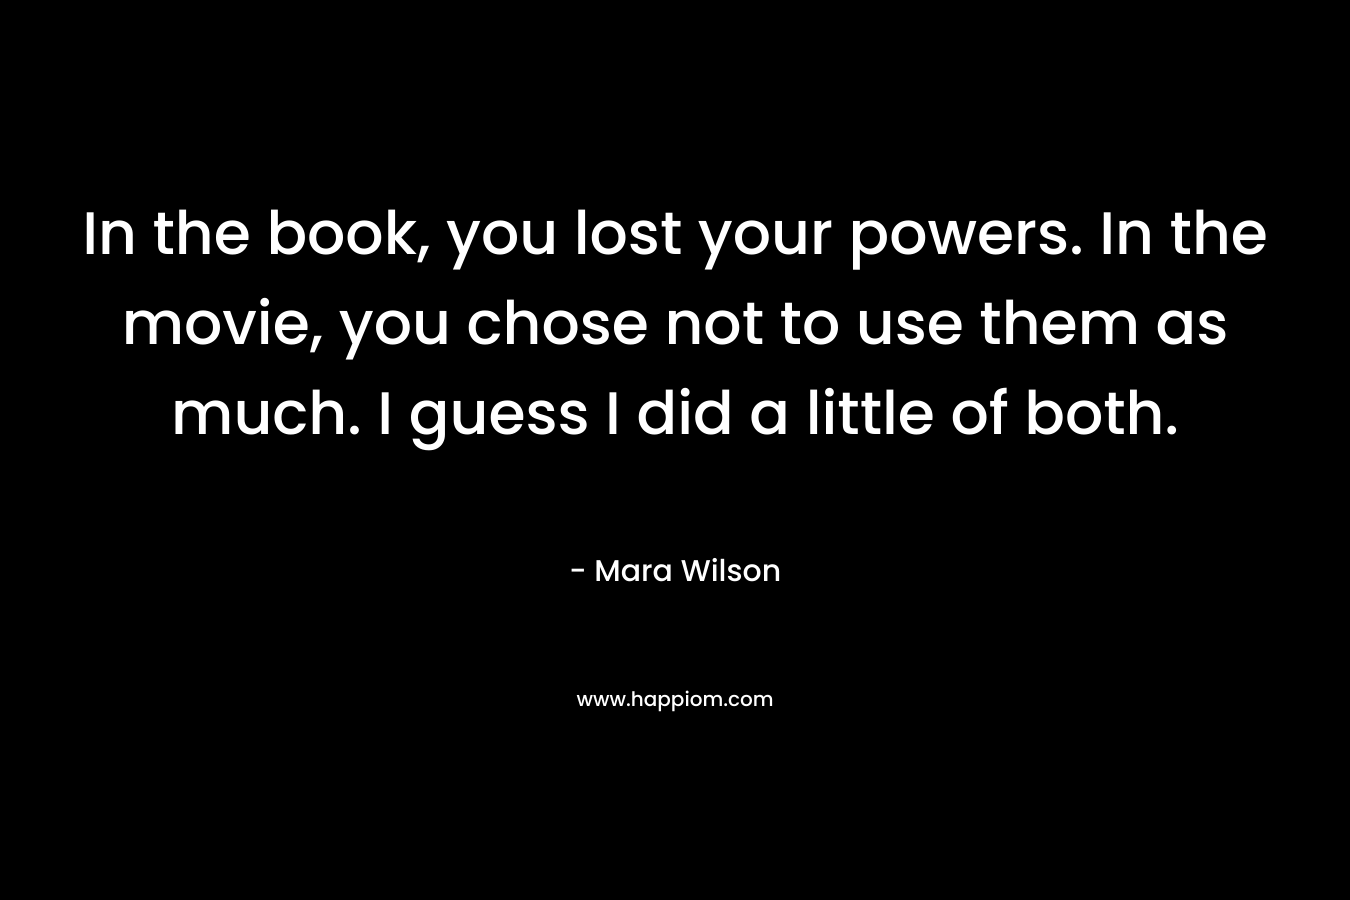 In the book, you lost your powers. In the movie, you chose not to use them as much. I guess I did a little of both. – Mara Wilson